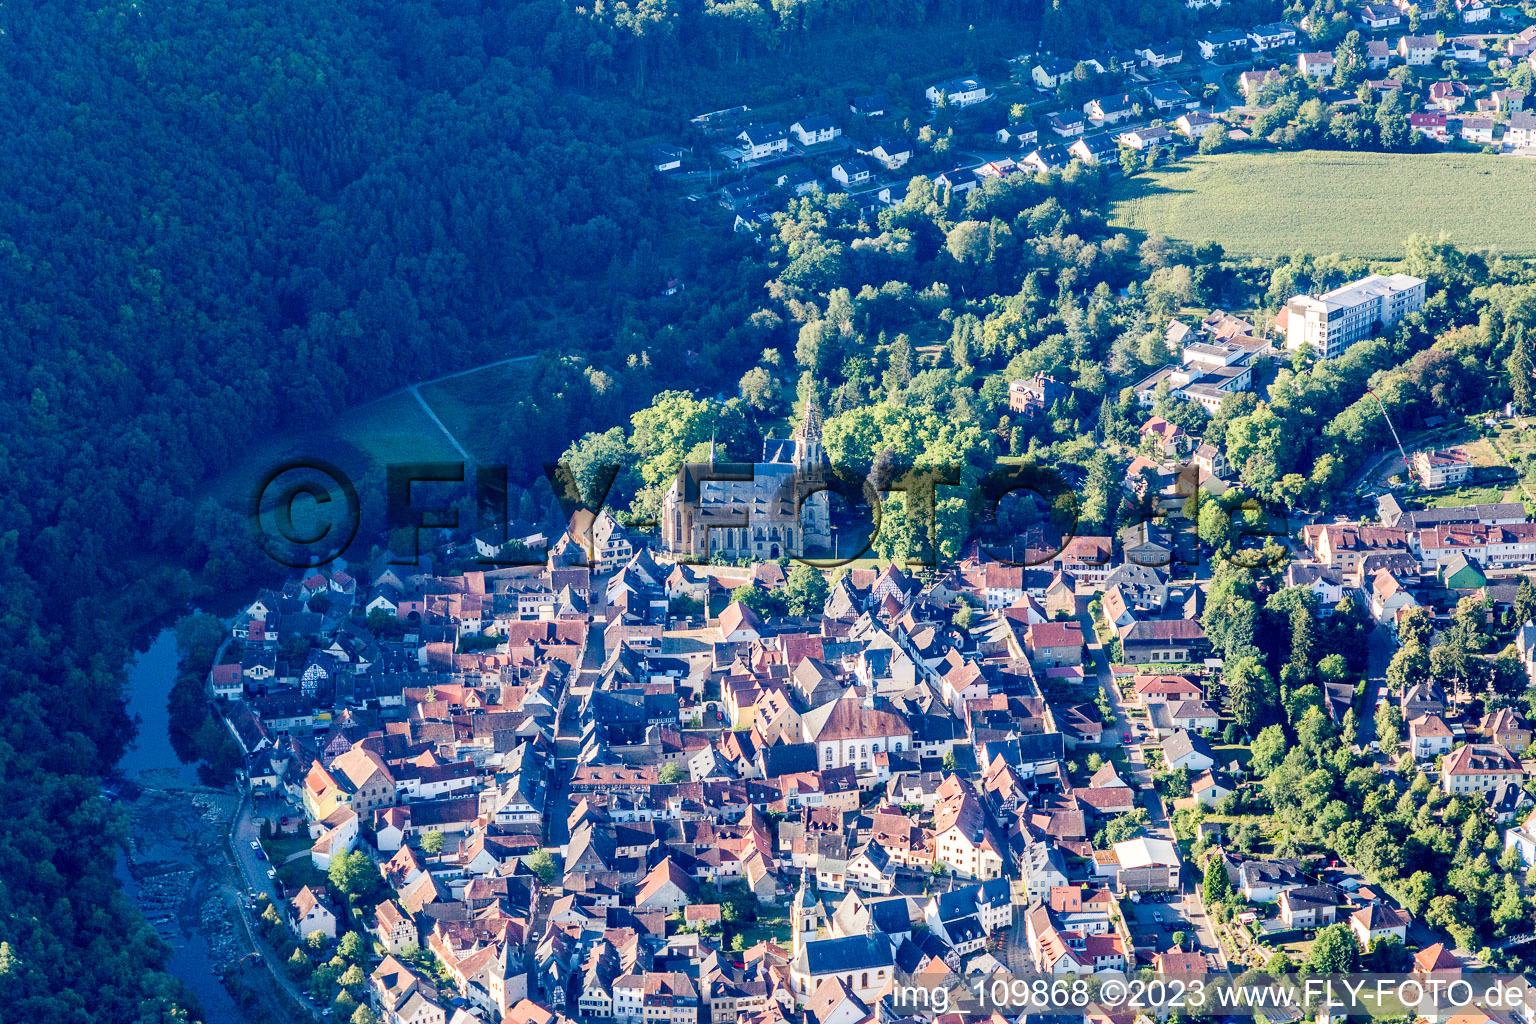 Drone recording of Meisenheim in the state Rhineland-Palatinate, Germany